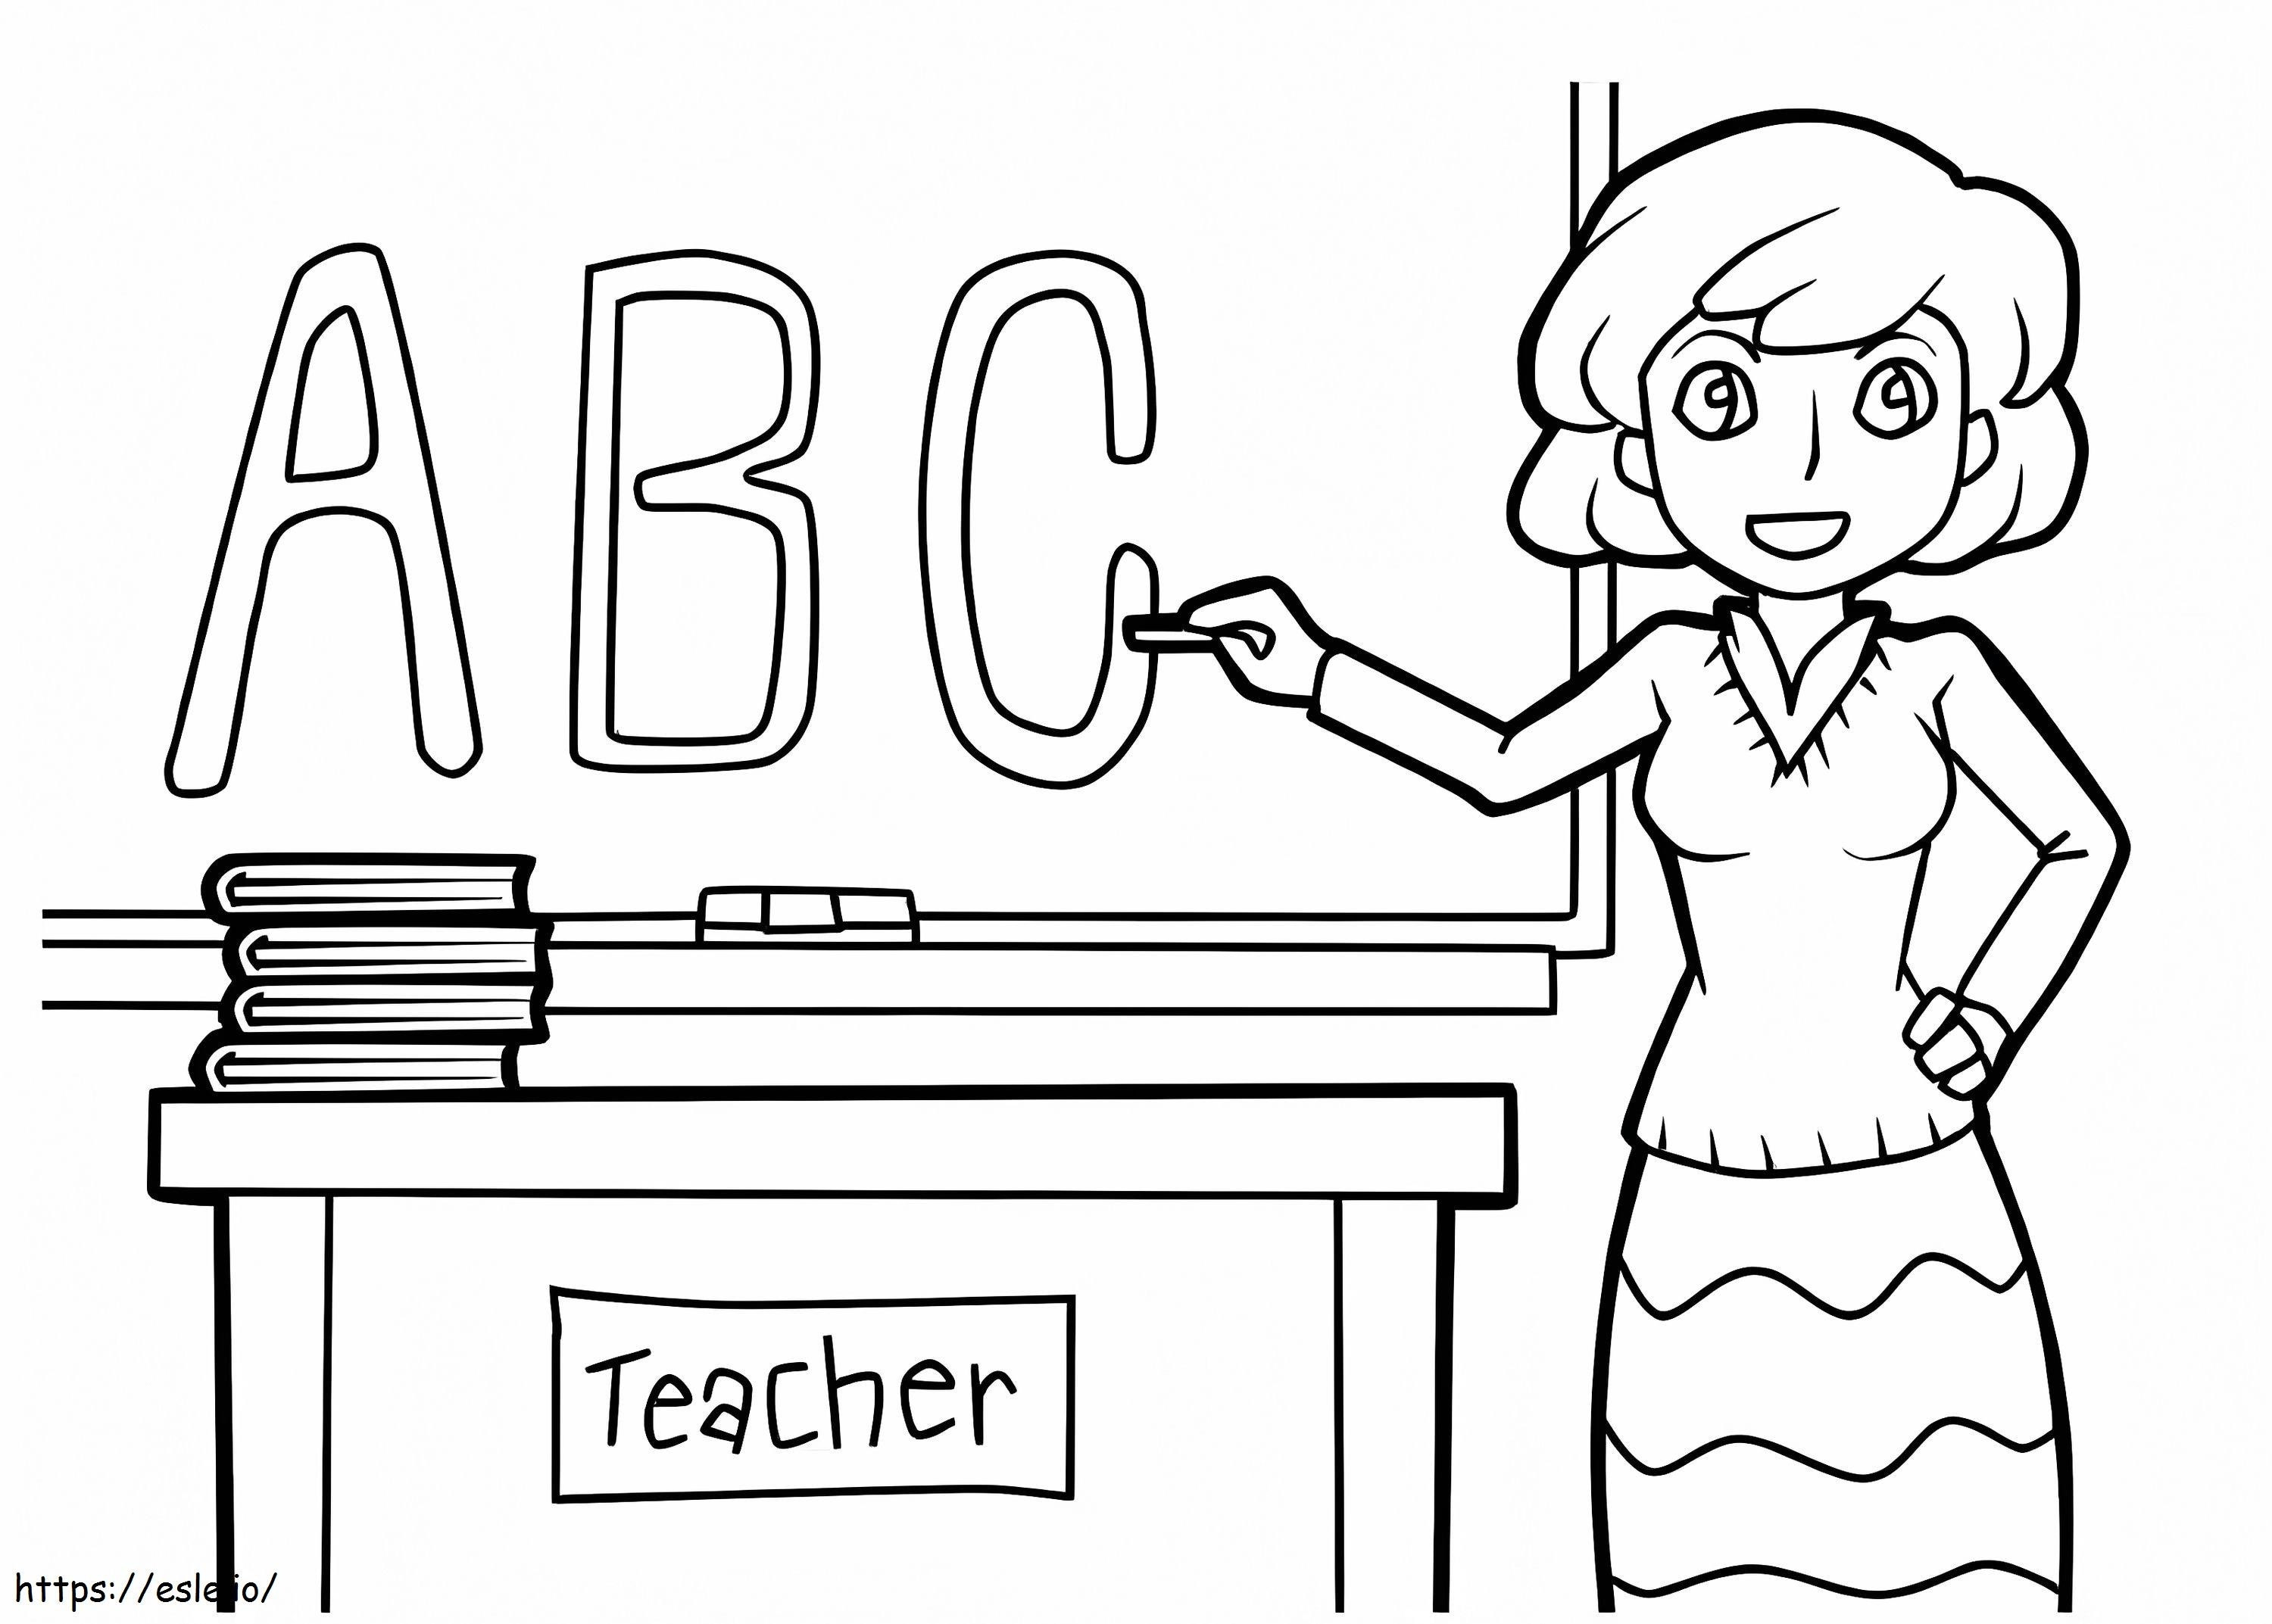 Teacher Teaching At School coloring page